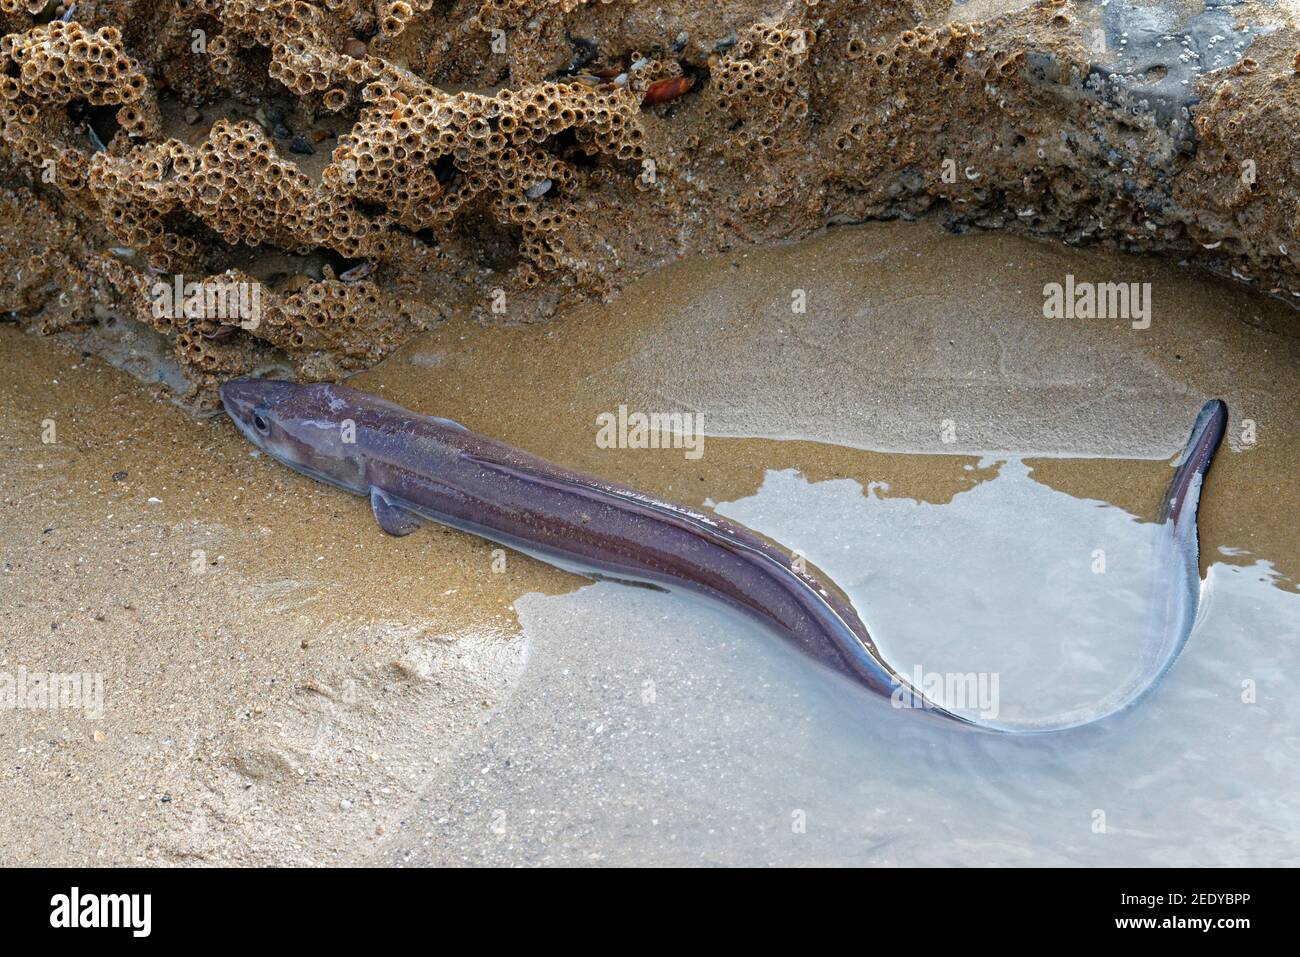 European eel (Anguilla anguilla) migratory adult “silver eel” trapped in a tide pool on a sandy beach on a very low tide, Dunraven bay, Wales. Stock Photo